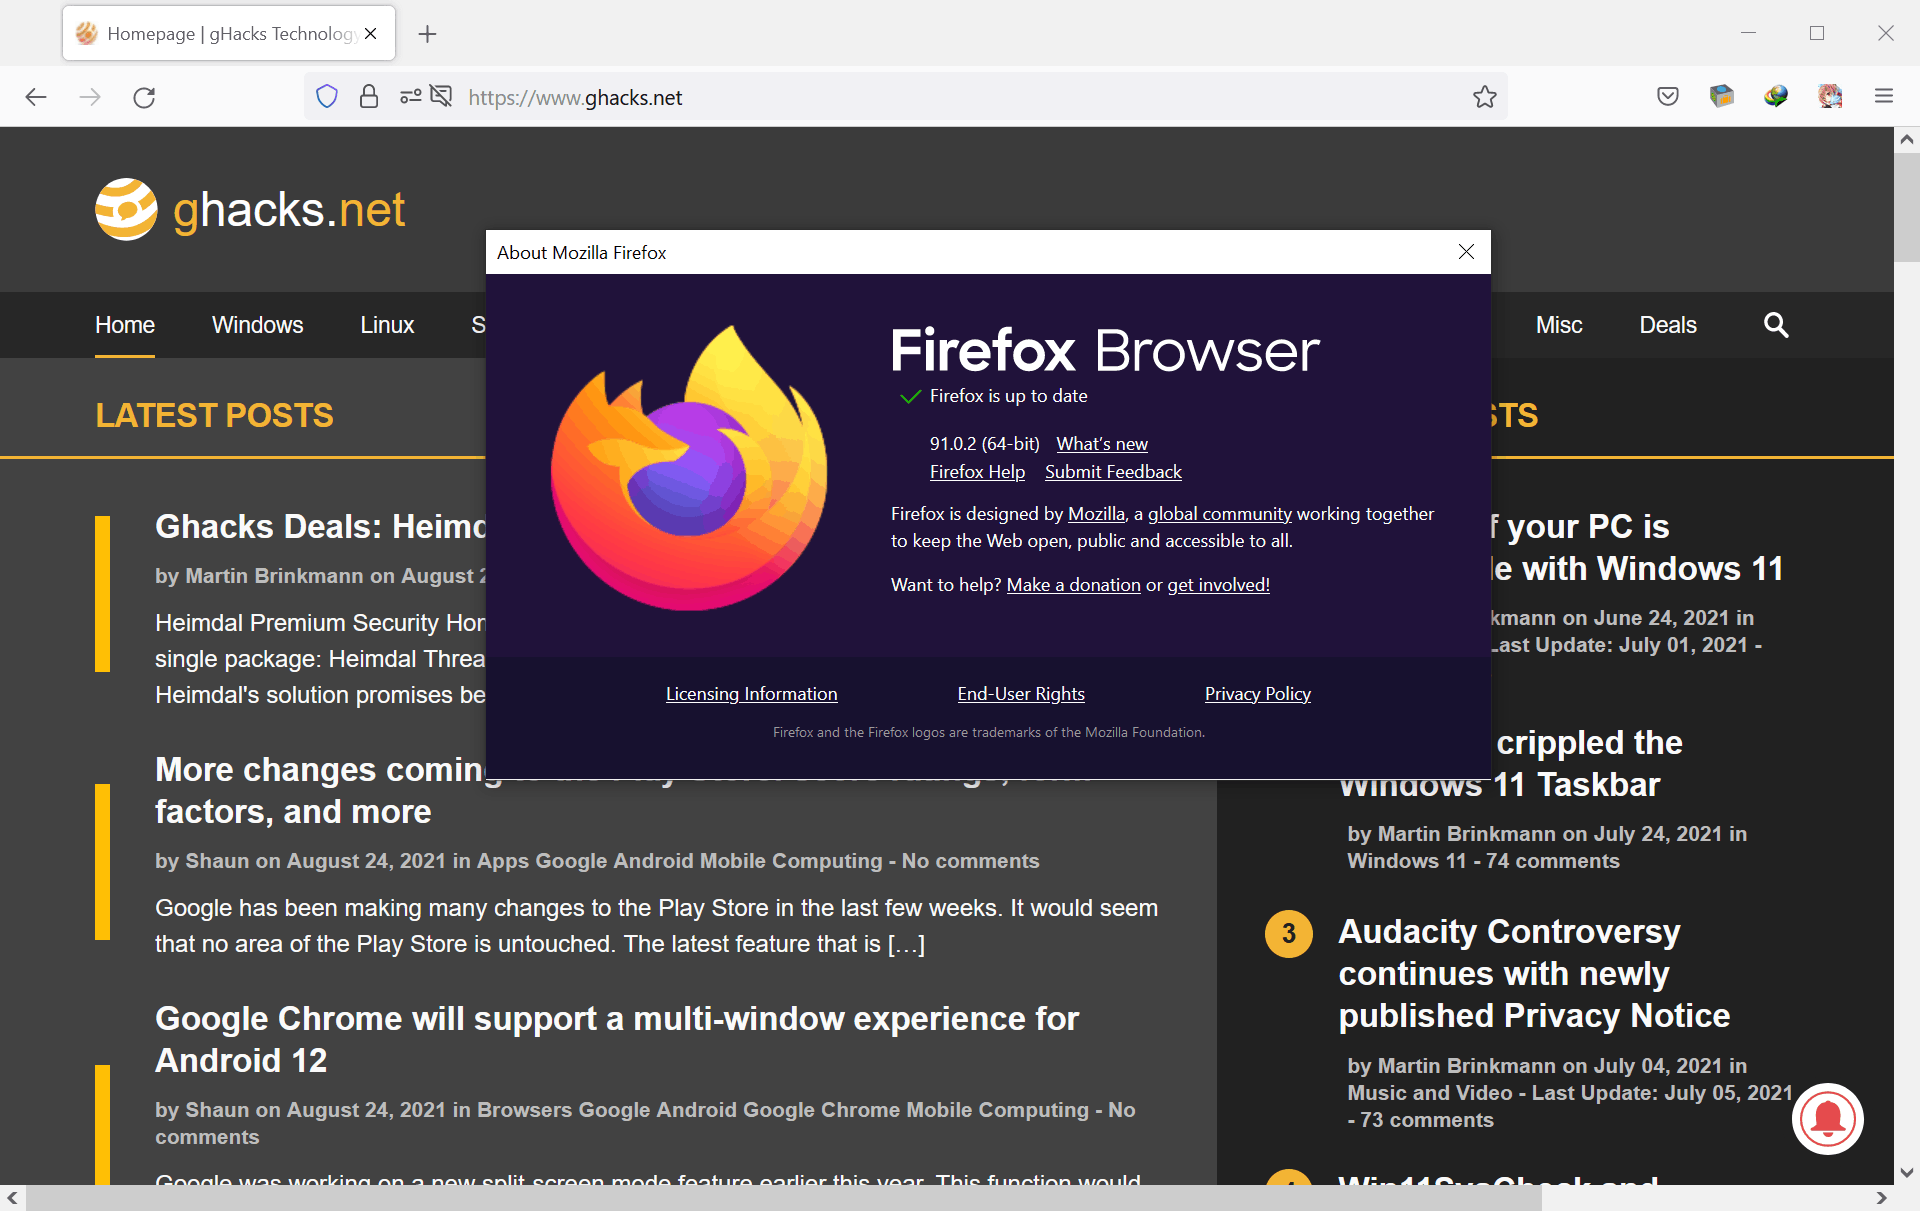 Firefox 91.0.2 will be released later today